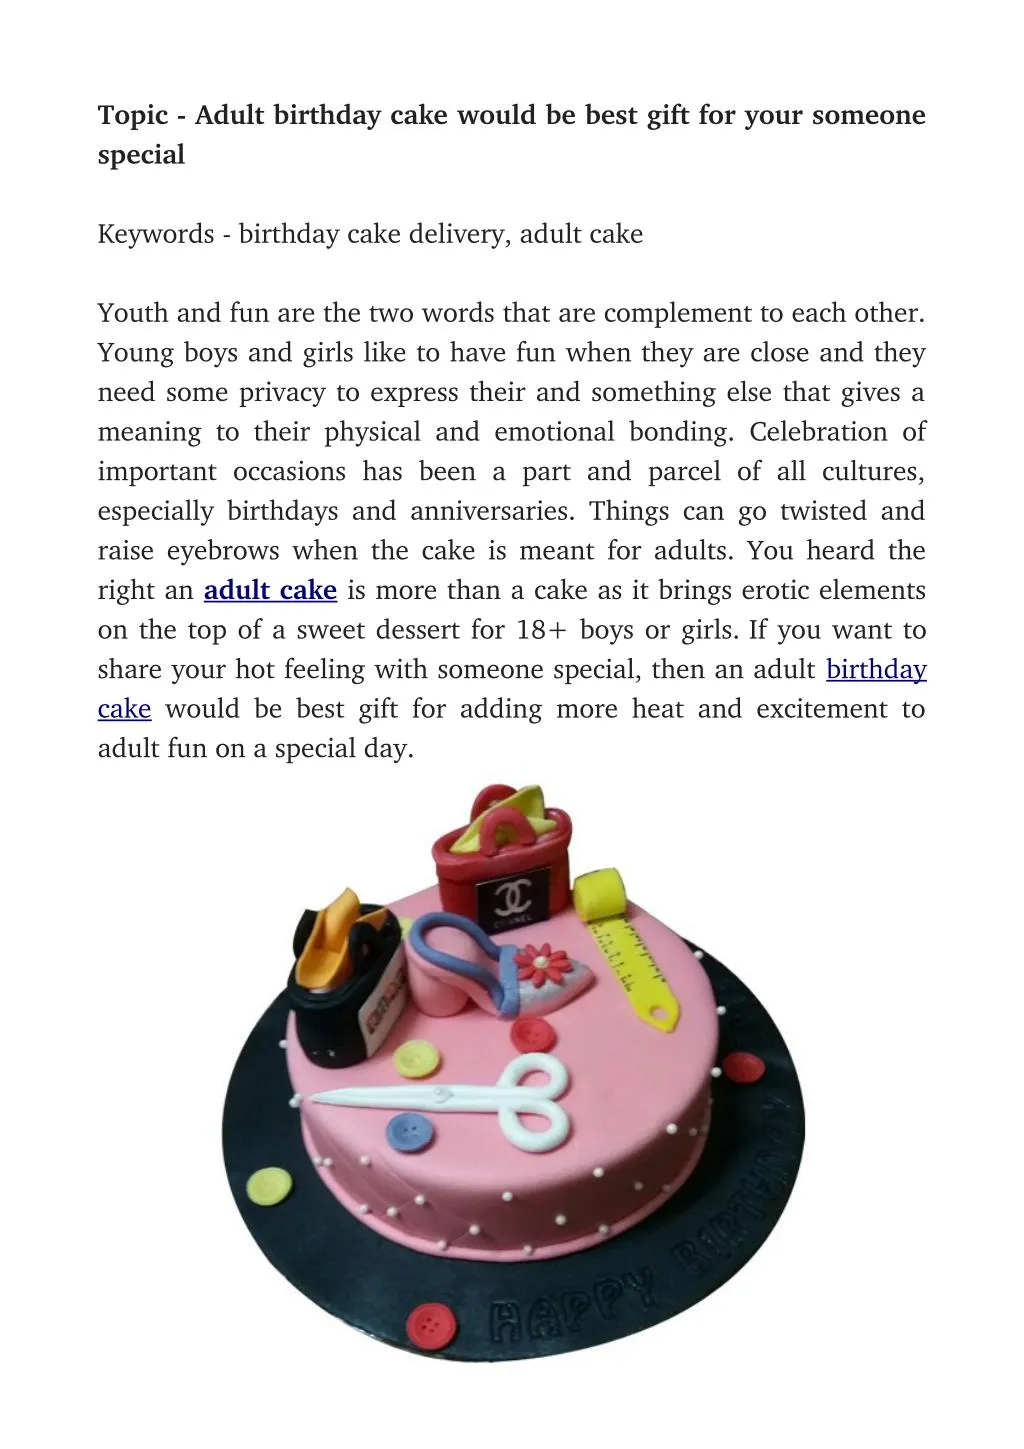 topic adult birthday cake would be best gift